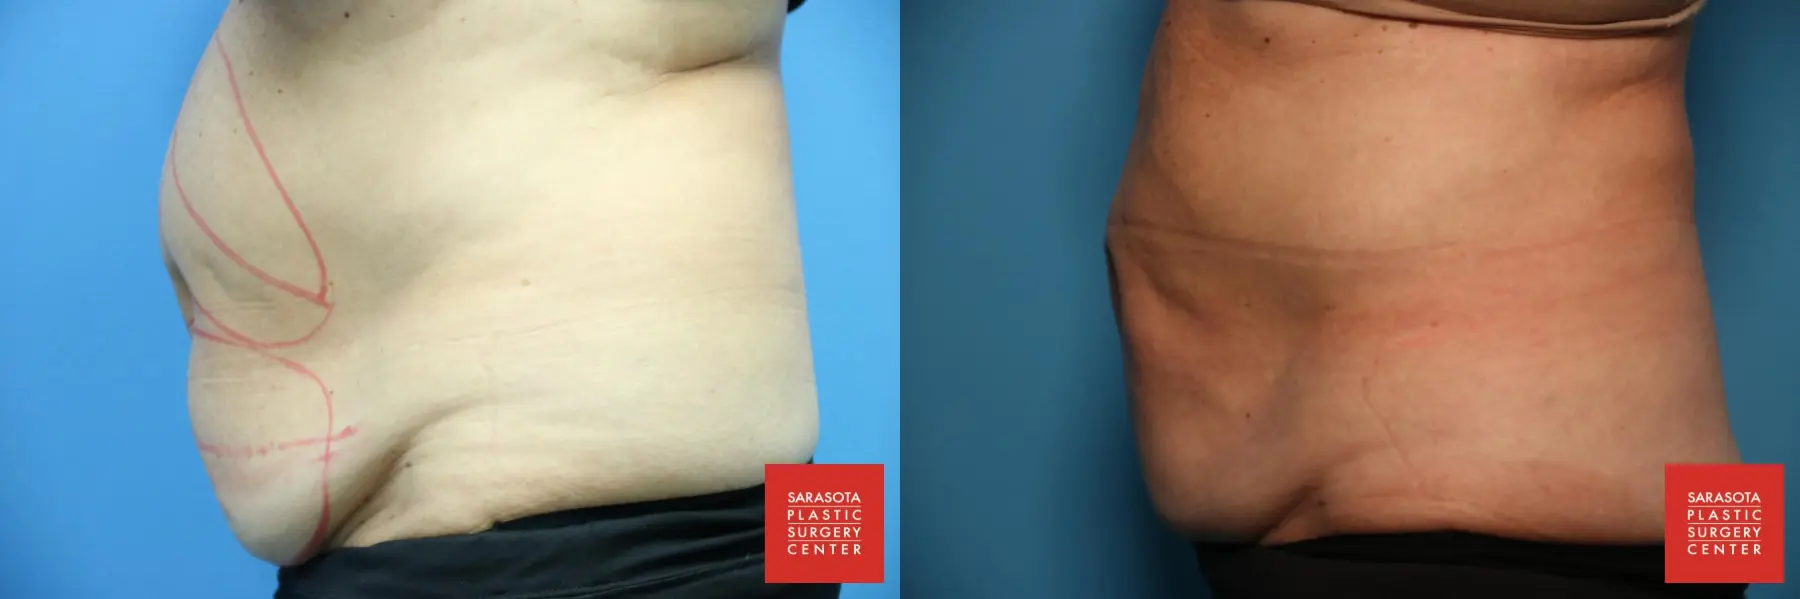 CoolSculpting®: Patient 6 - Before and After 3